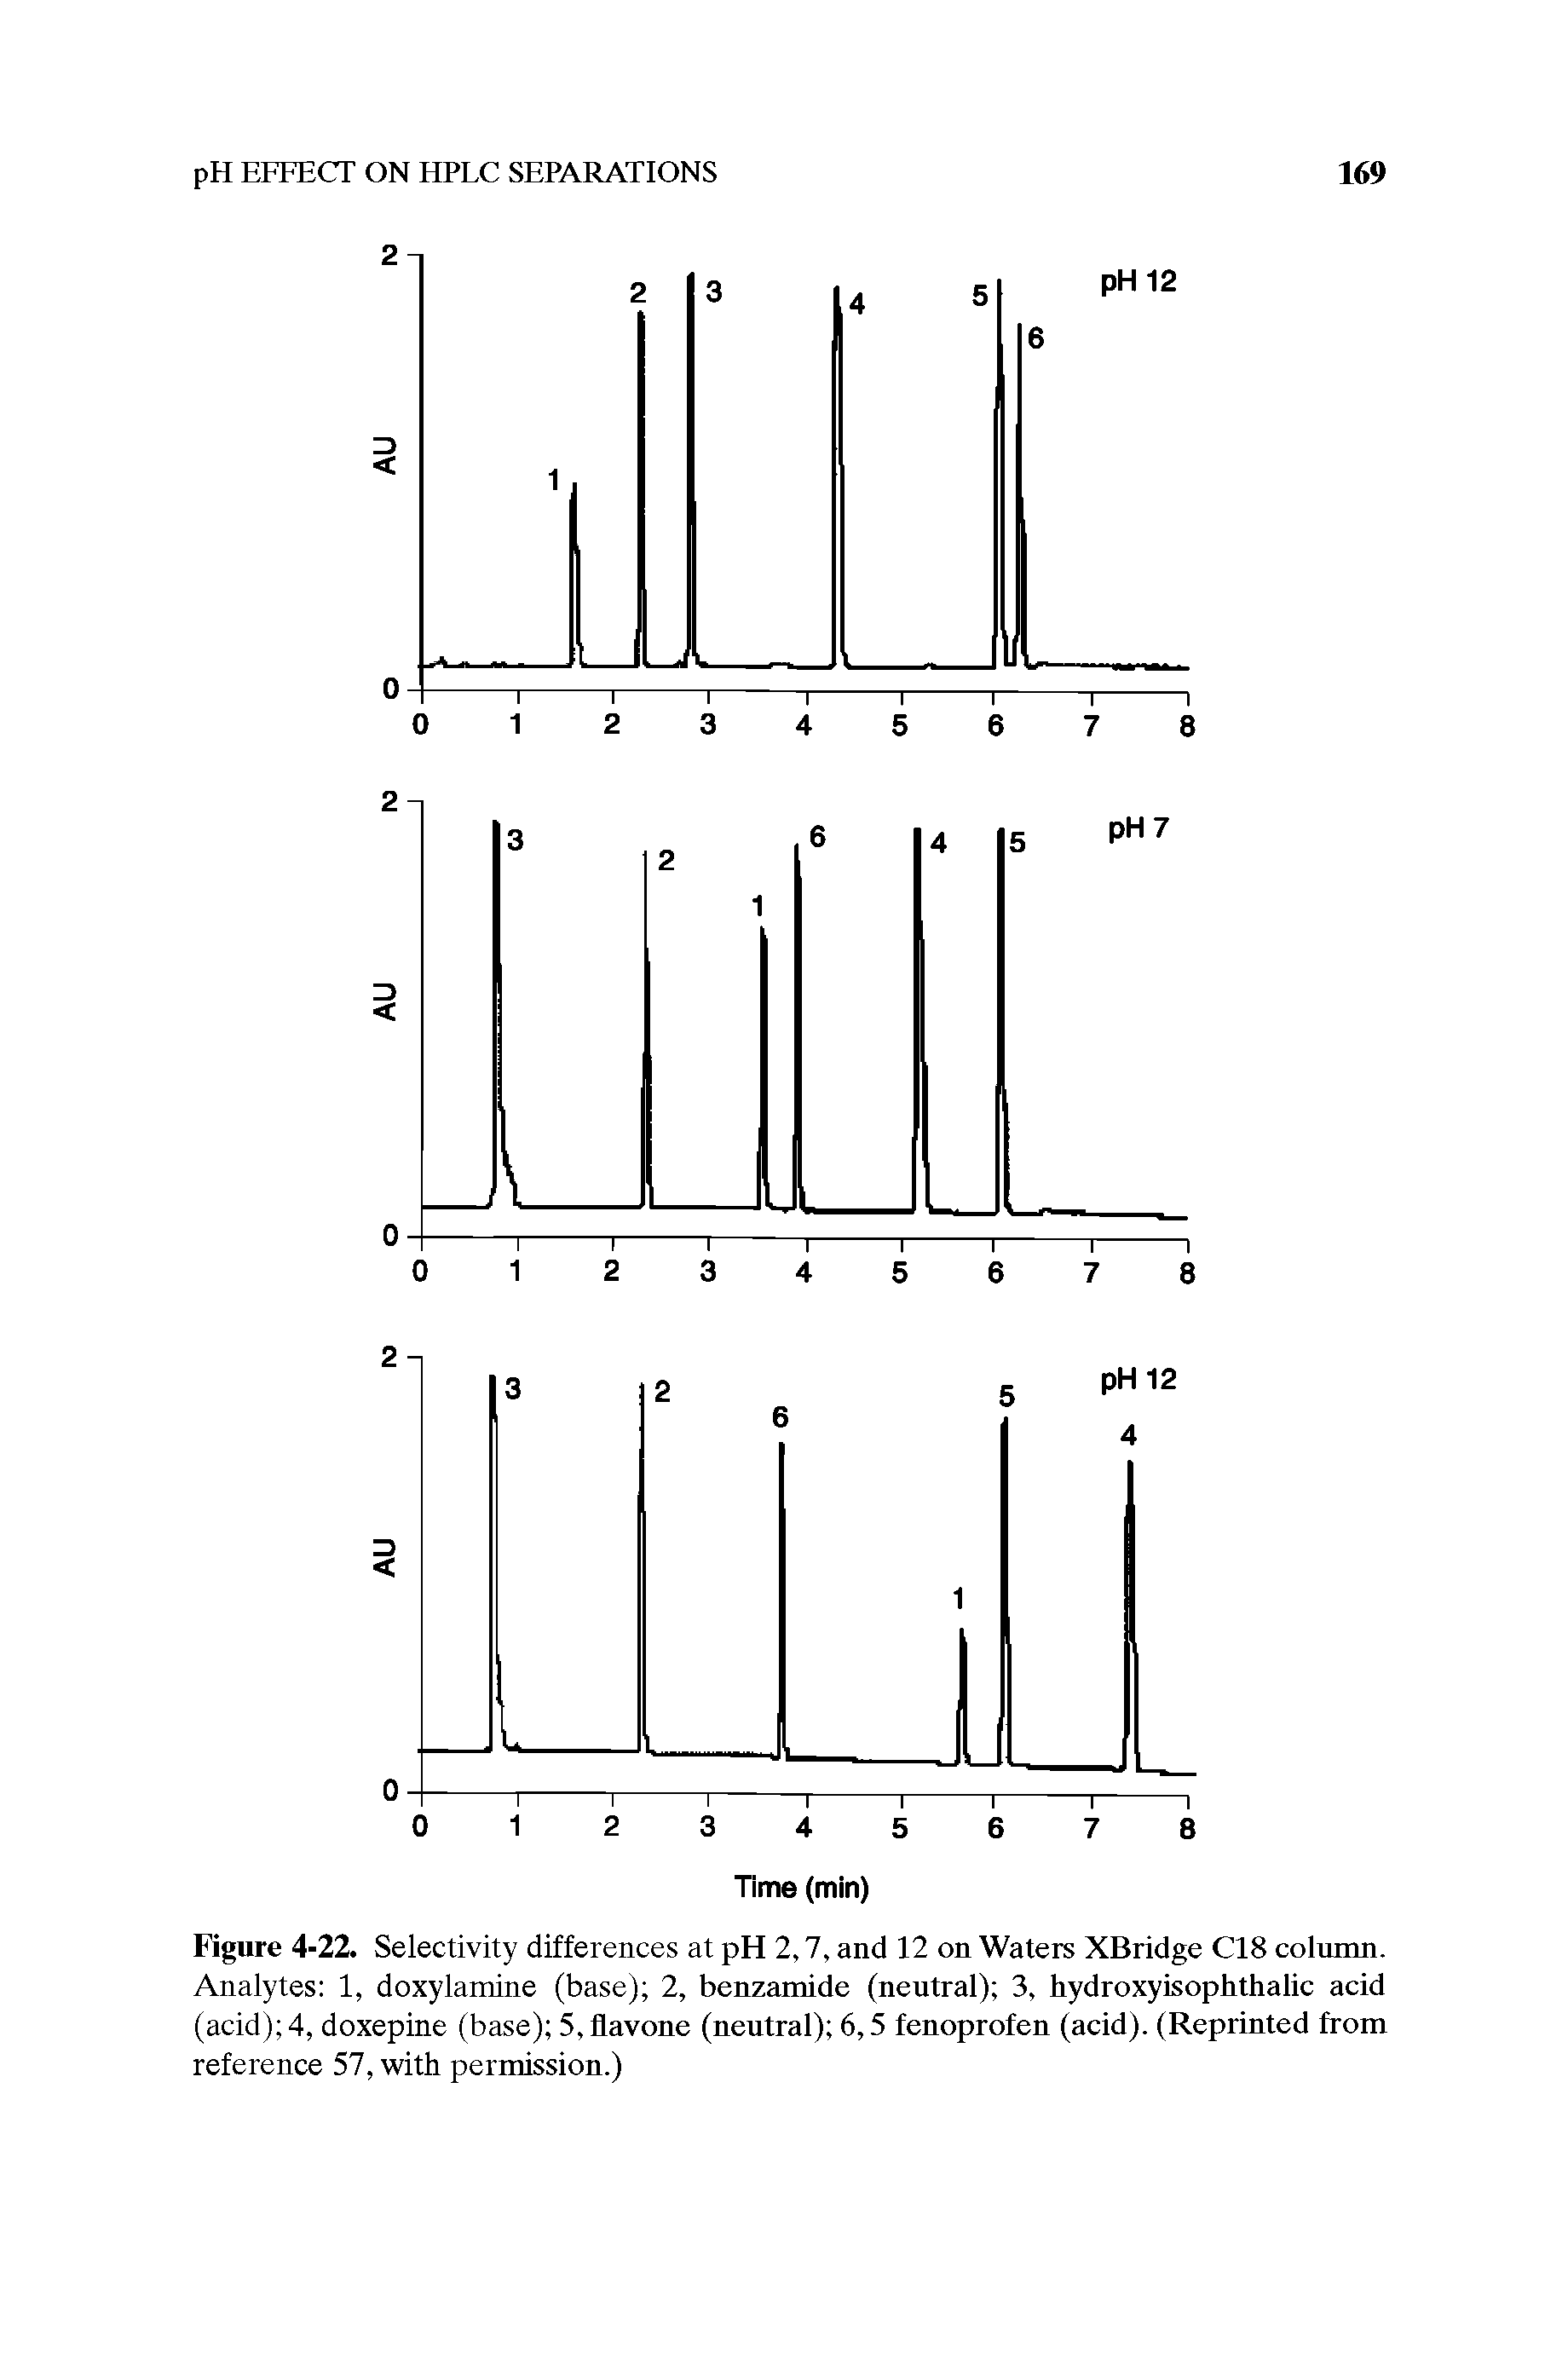 Figure 4-22. Selectivity differences at pH 2,7, and 12 on Waters XBridge CIS column. Analytes 1, doxylamine (base) 2, benzamide (neutral) 3, hydroxyisophthalic acid (acid) 4, doxepine (base) 5,flavone (neutral) 6,5 fenoprofen (acid). (Reprinted from reference 57, with permission.)...